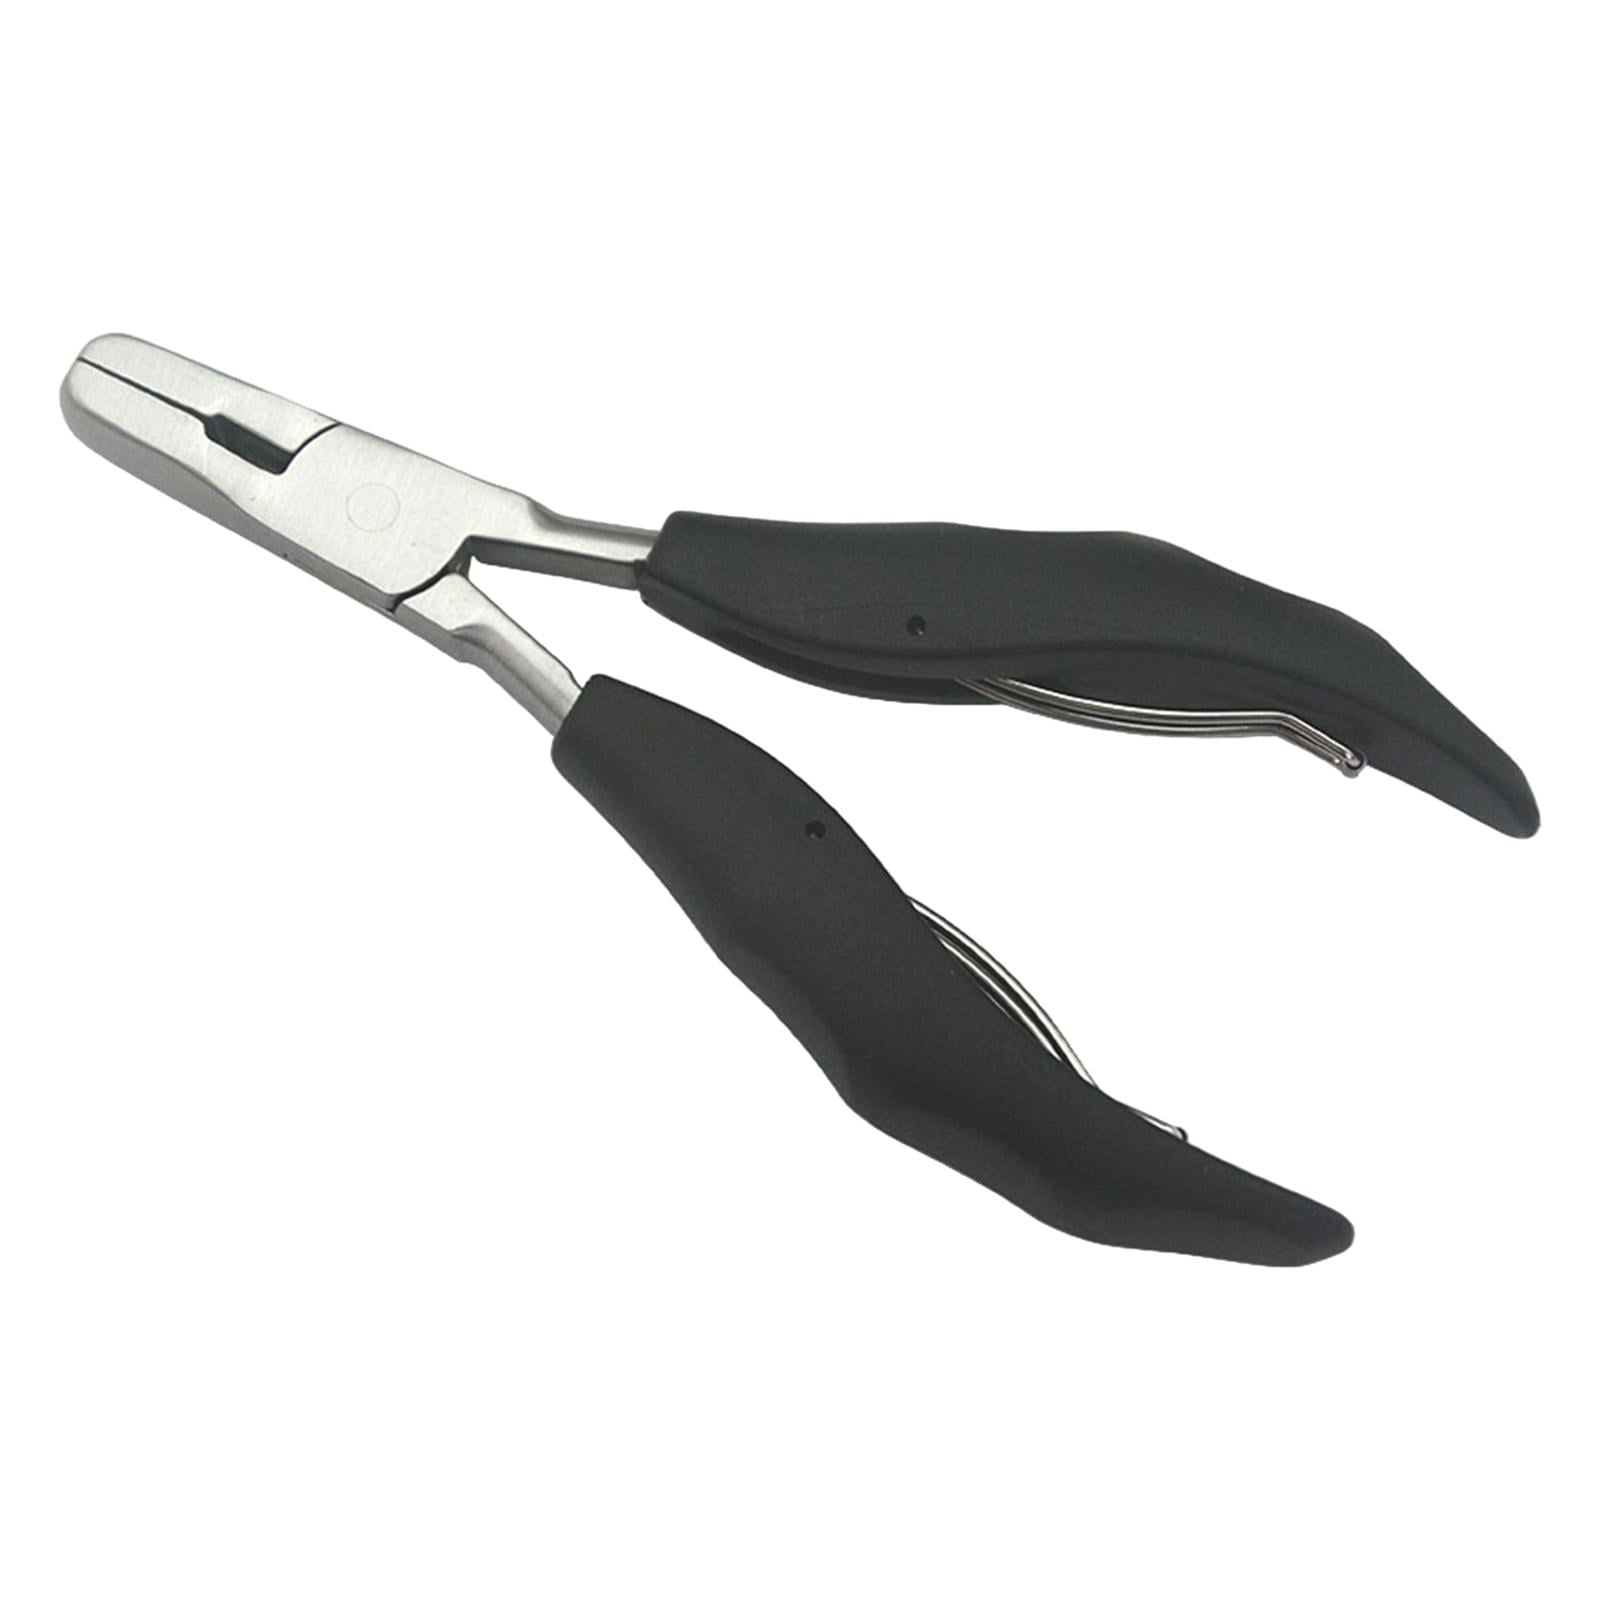 U-Shaped Pliers for Hot Fusion Hair Extensions